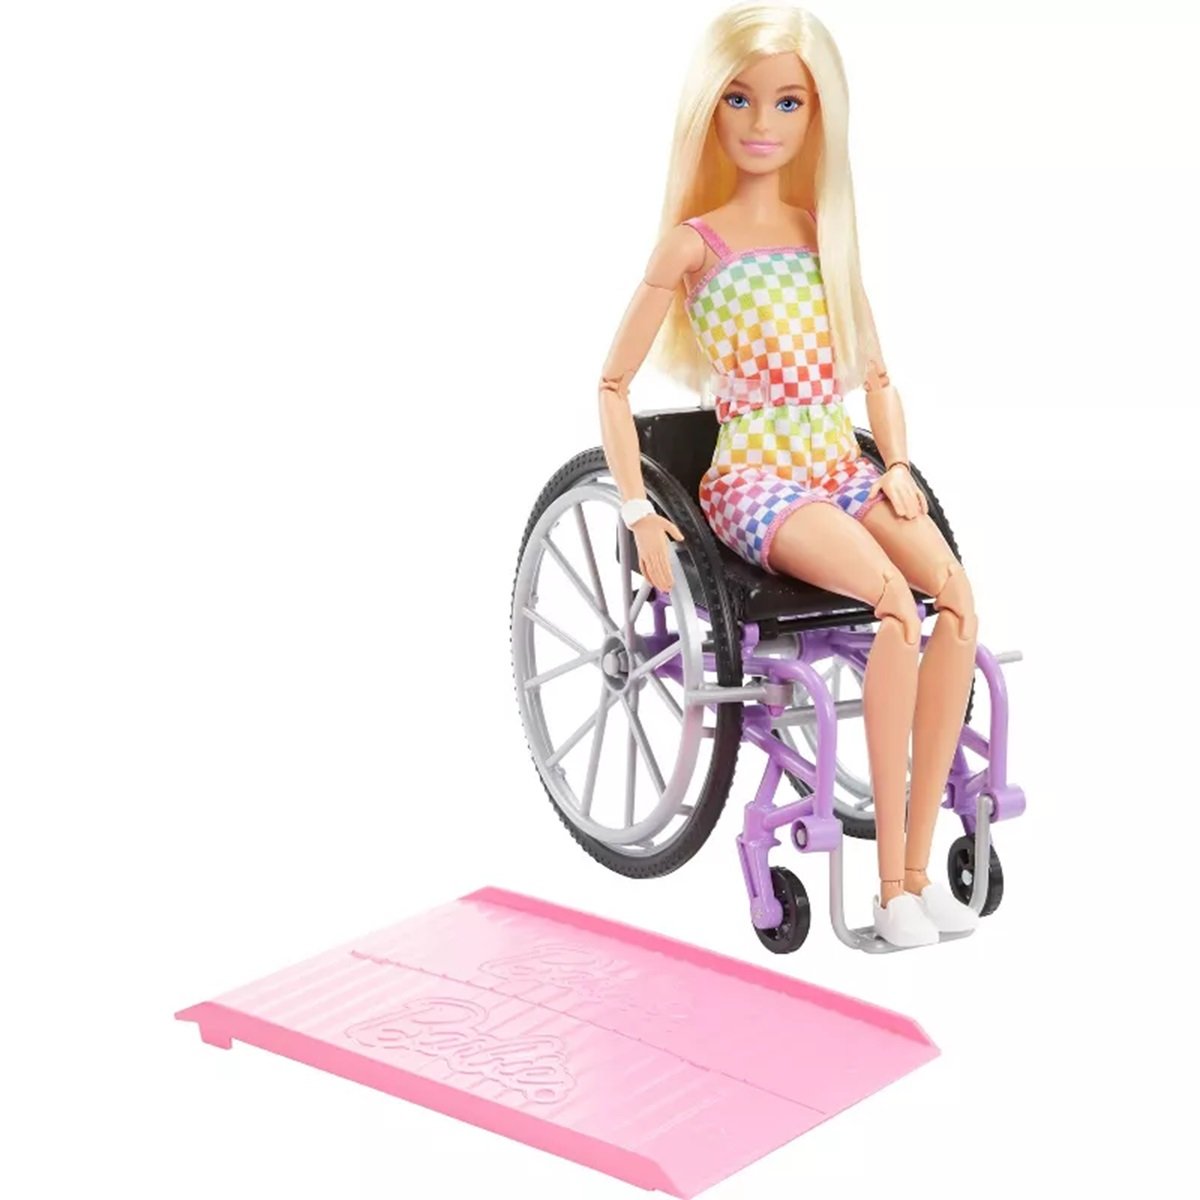 Barbie doll using a wheelchair with ramp